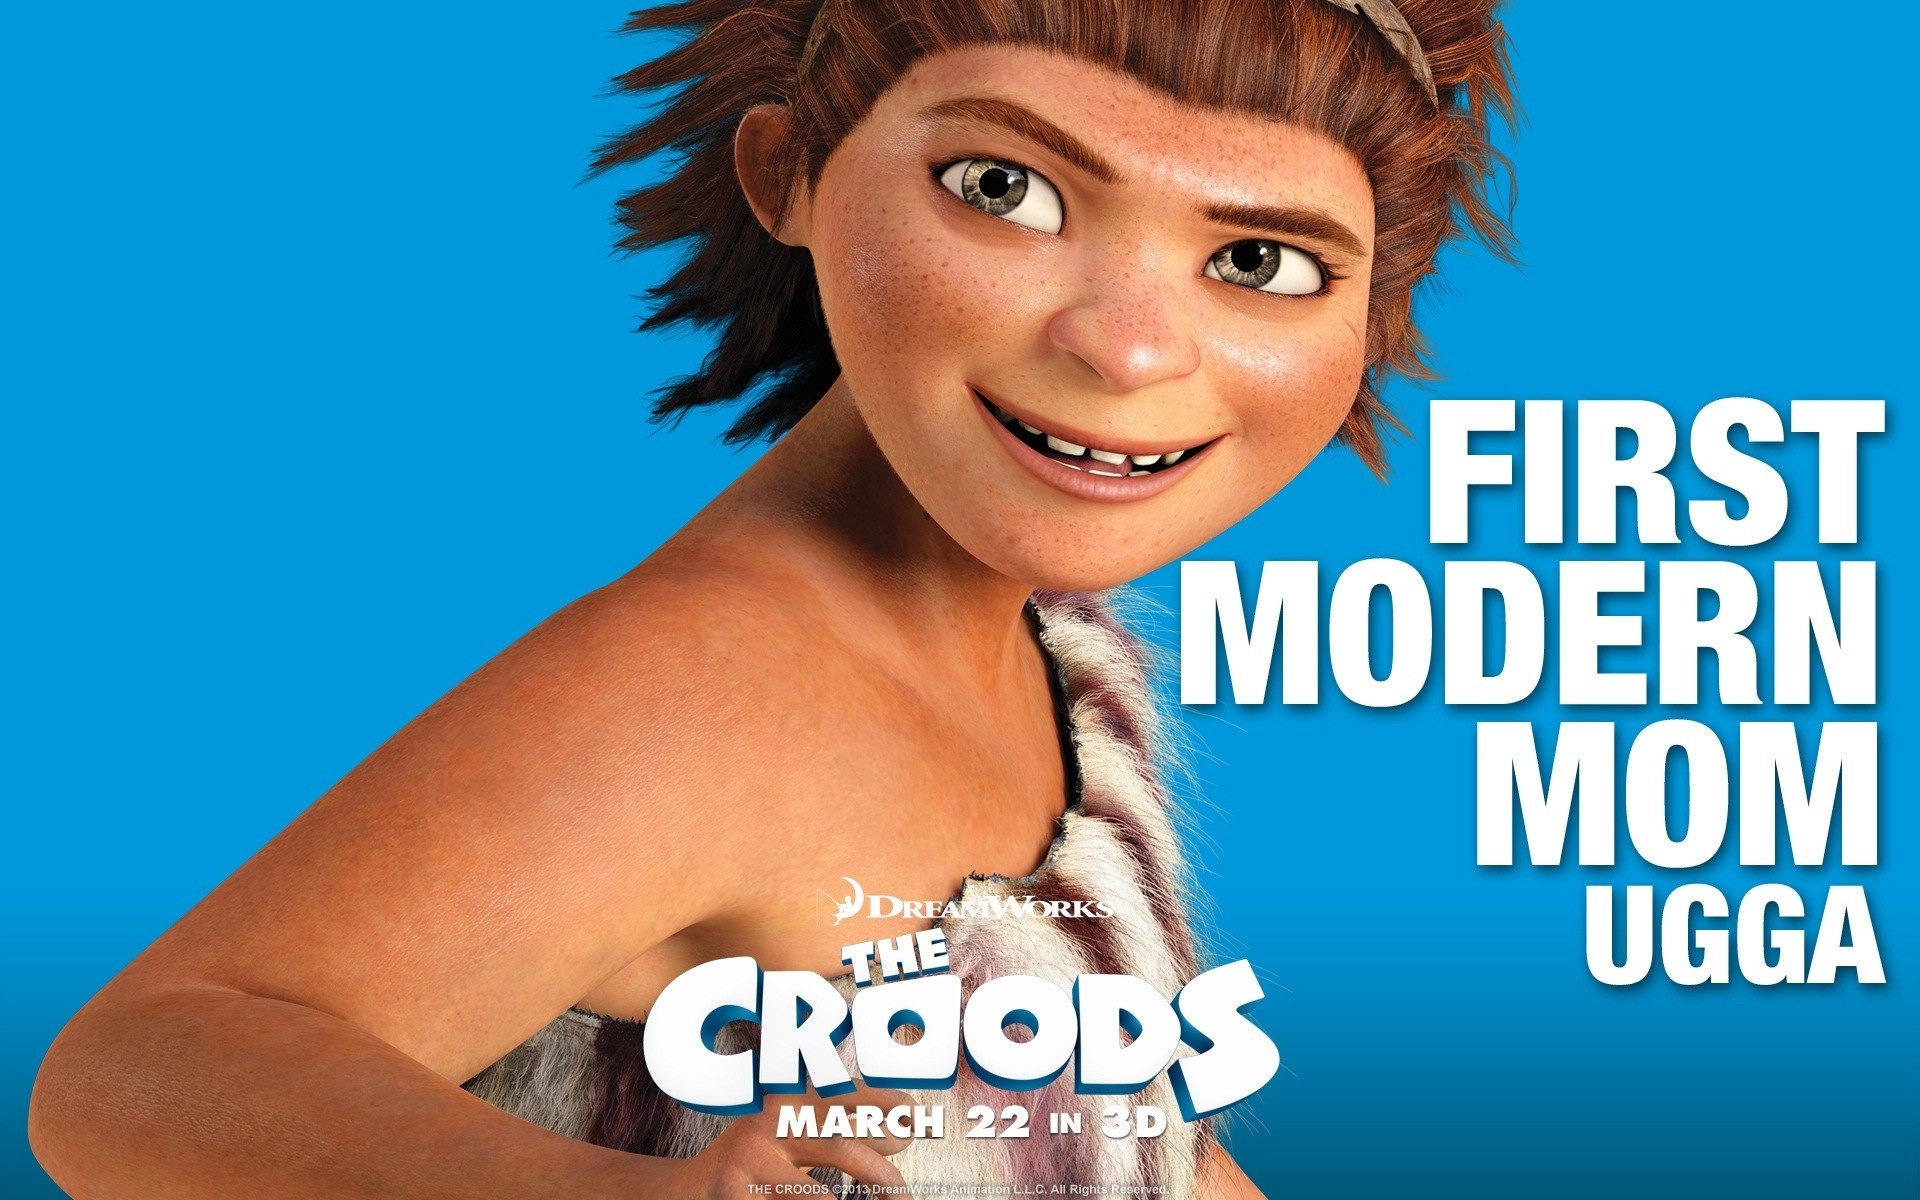 The Croods HD movie wallpapers #7 - 1920x1200